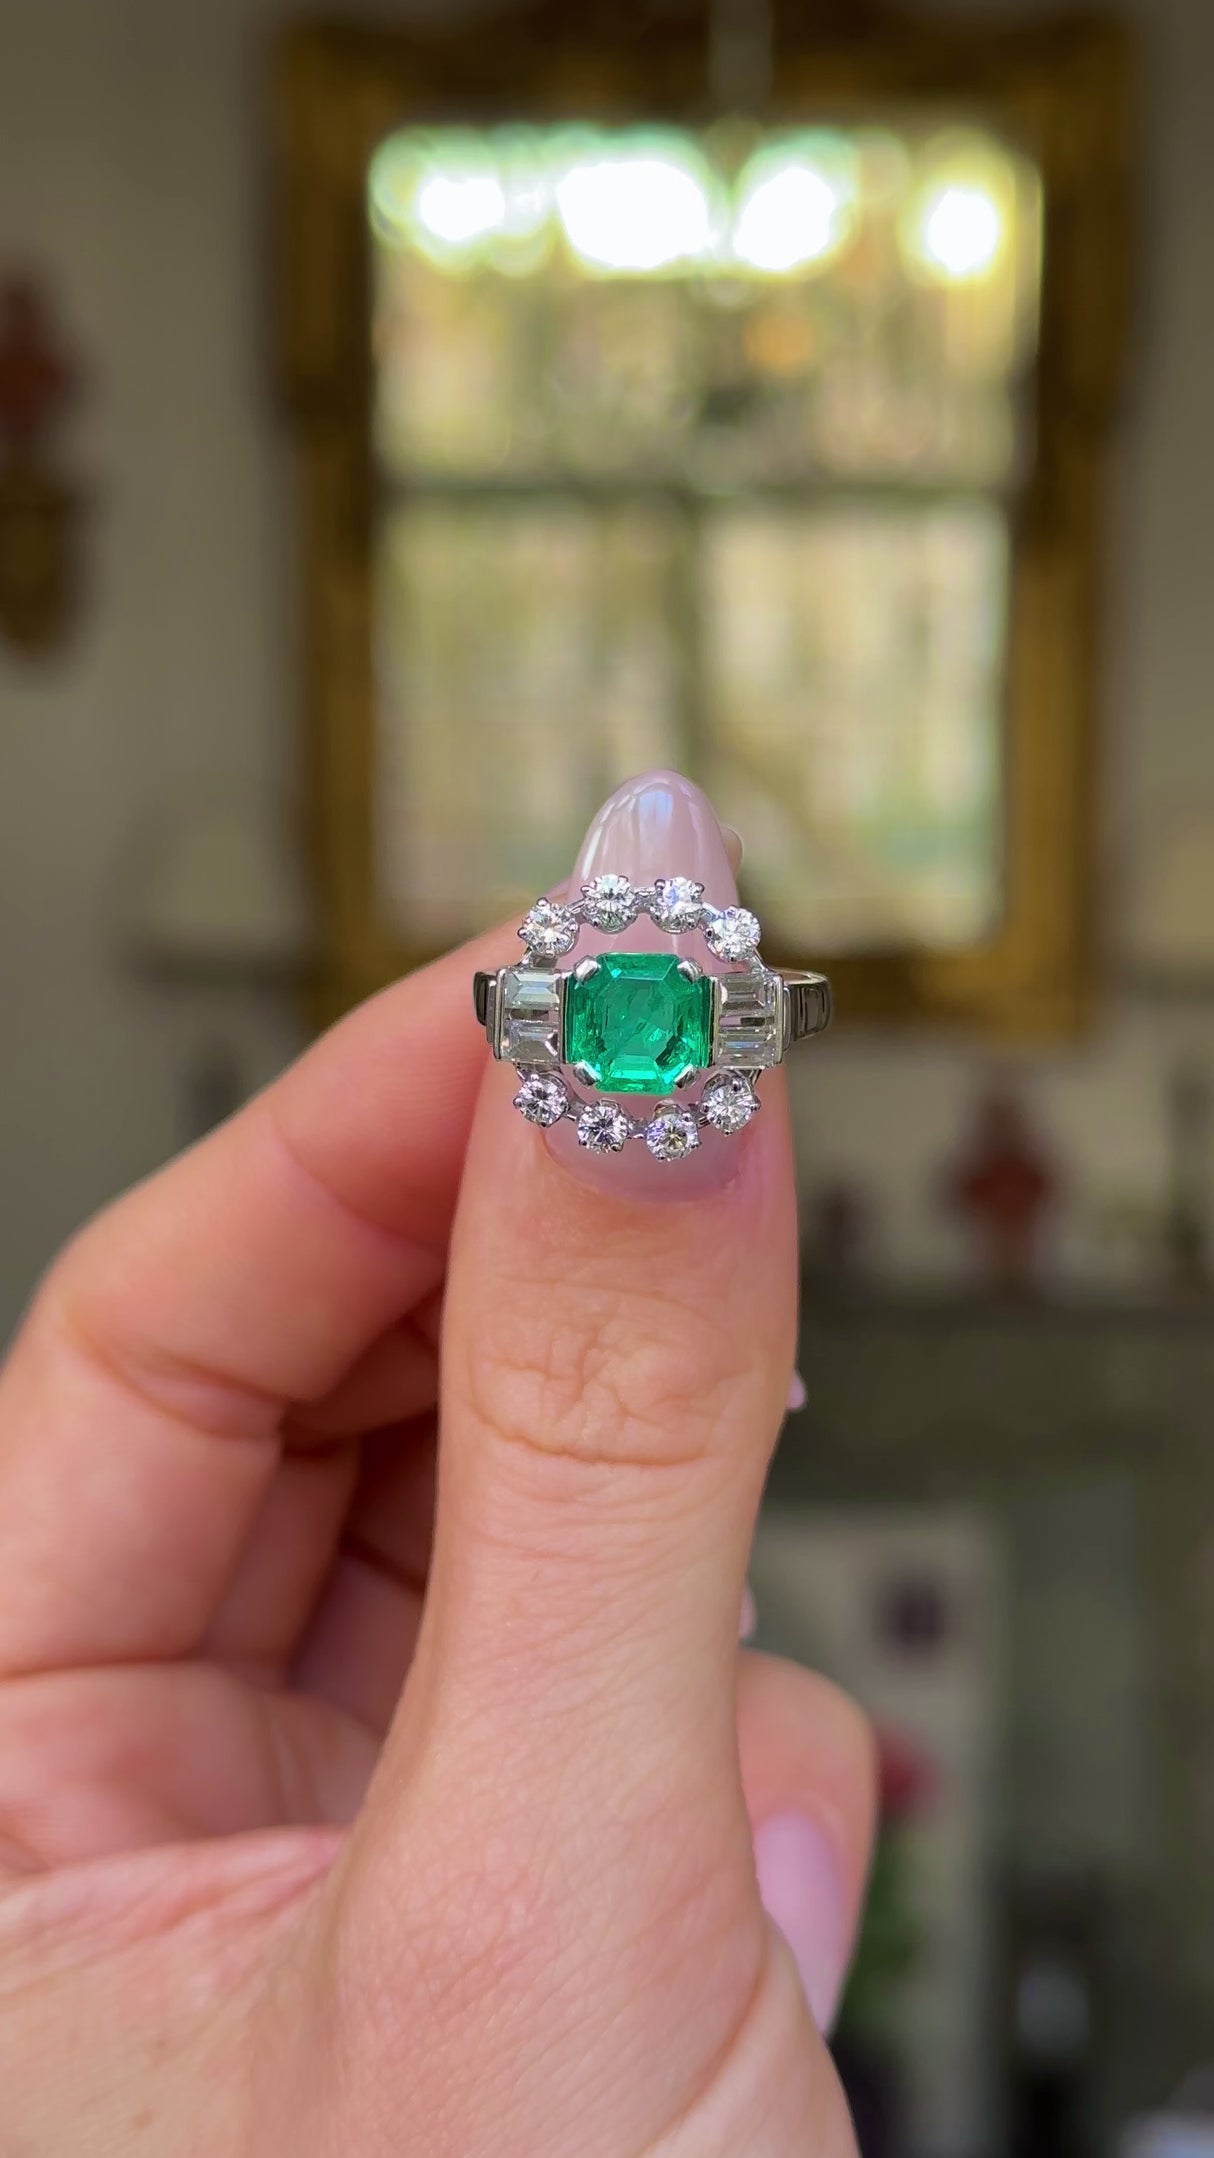 Vintage emerald and diamond ring held in fingers and moved around to give perspective,